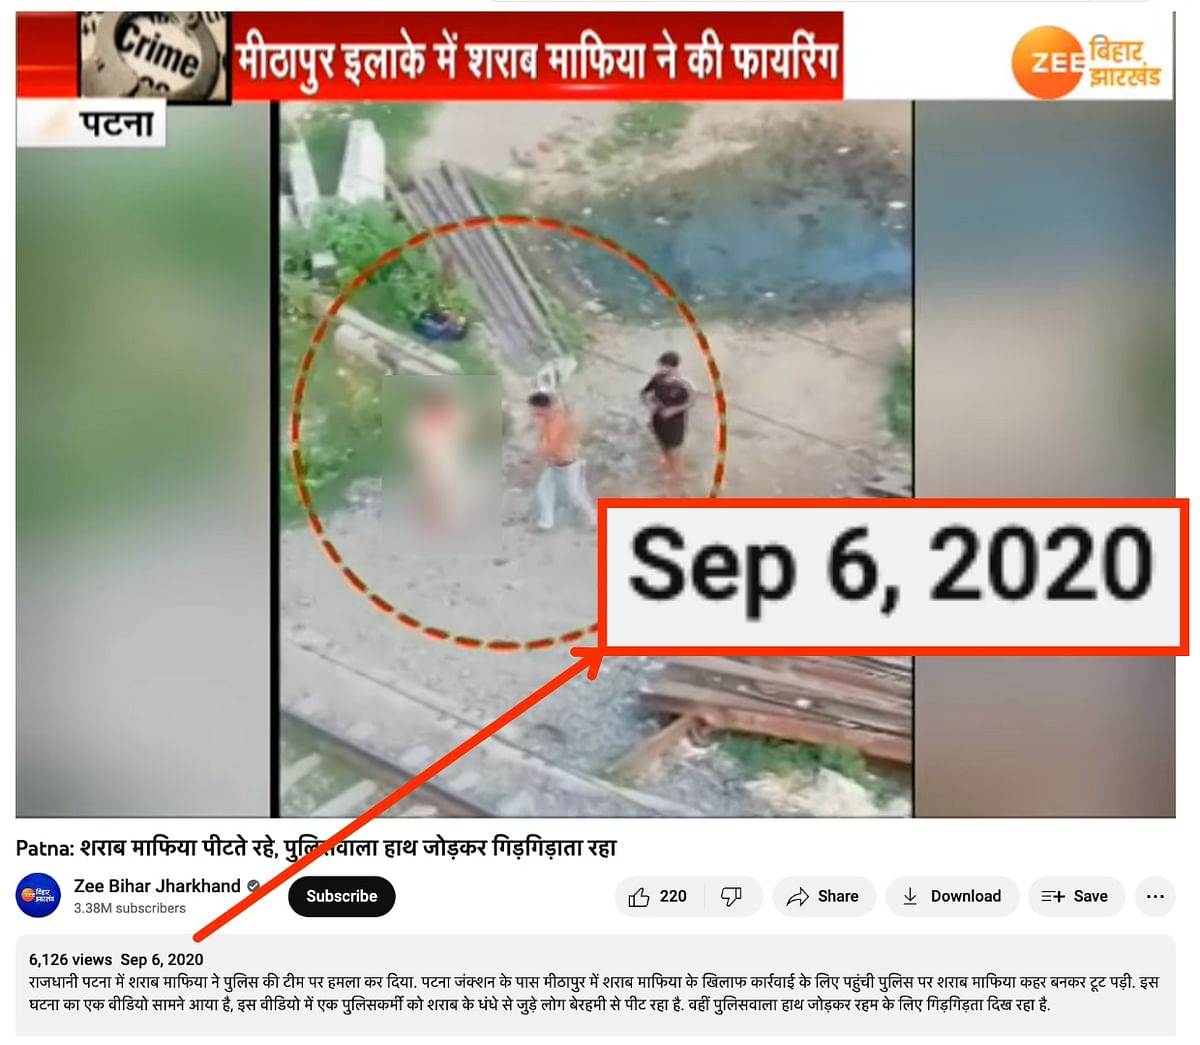 The video dates back to September 2020, when a JD(U)-BJP alliance was in power in Bihar.